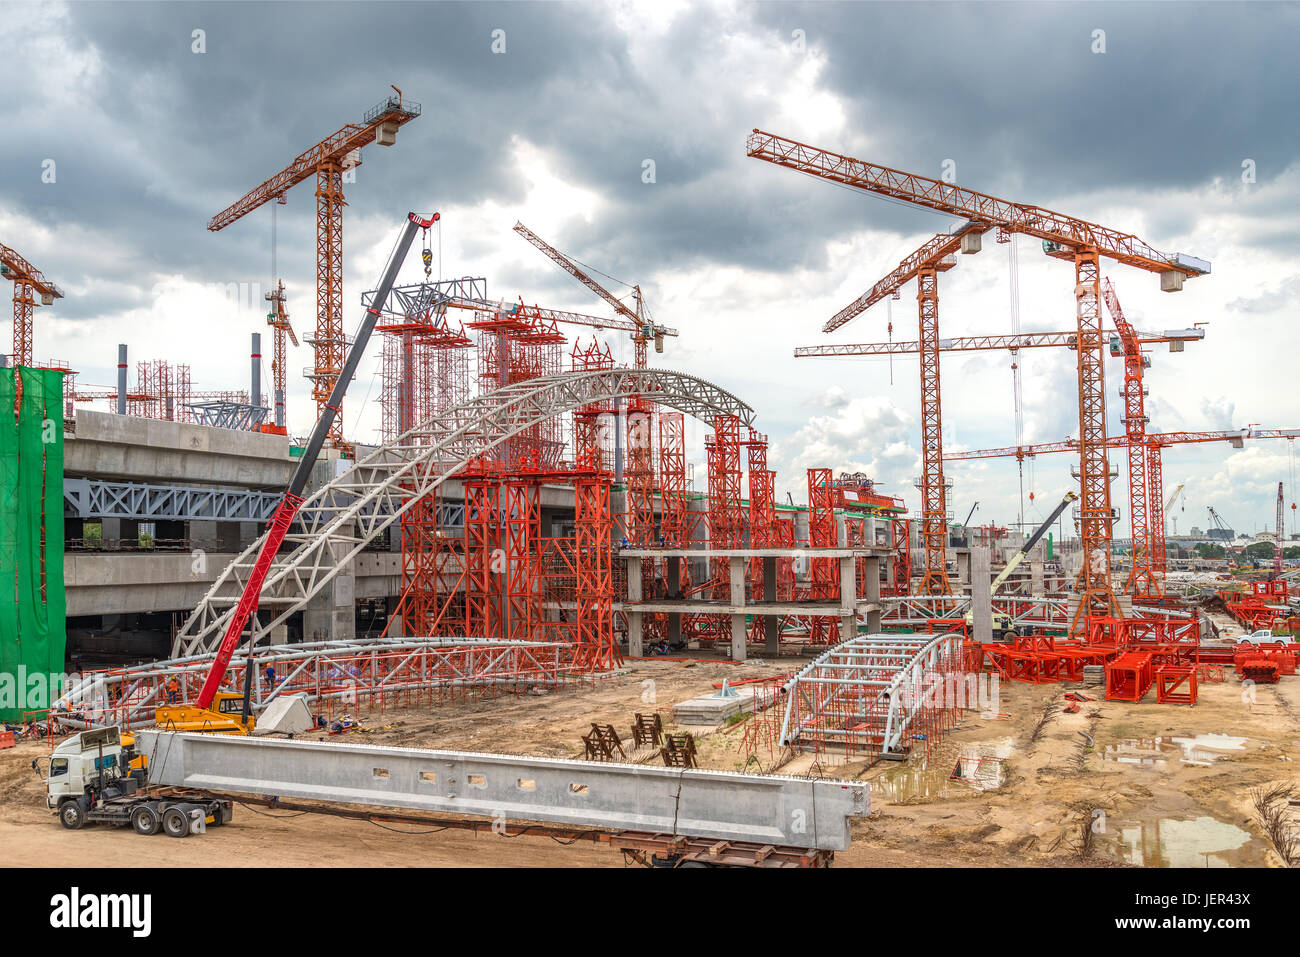 Industrial Cranes on Construction of Expressway Site in Asia Stock Photo